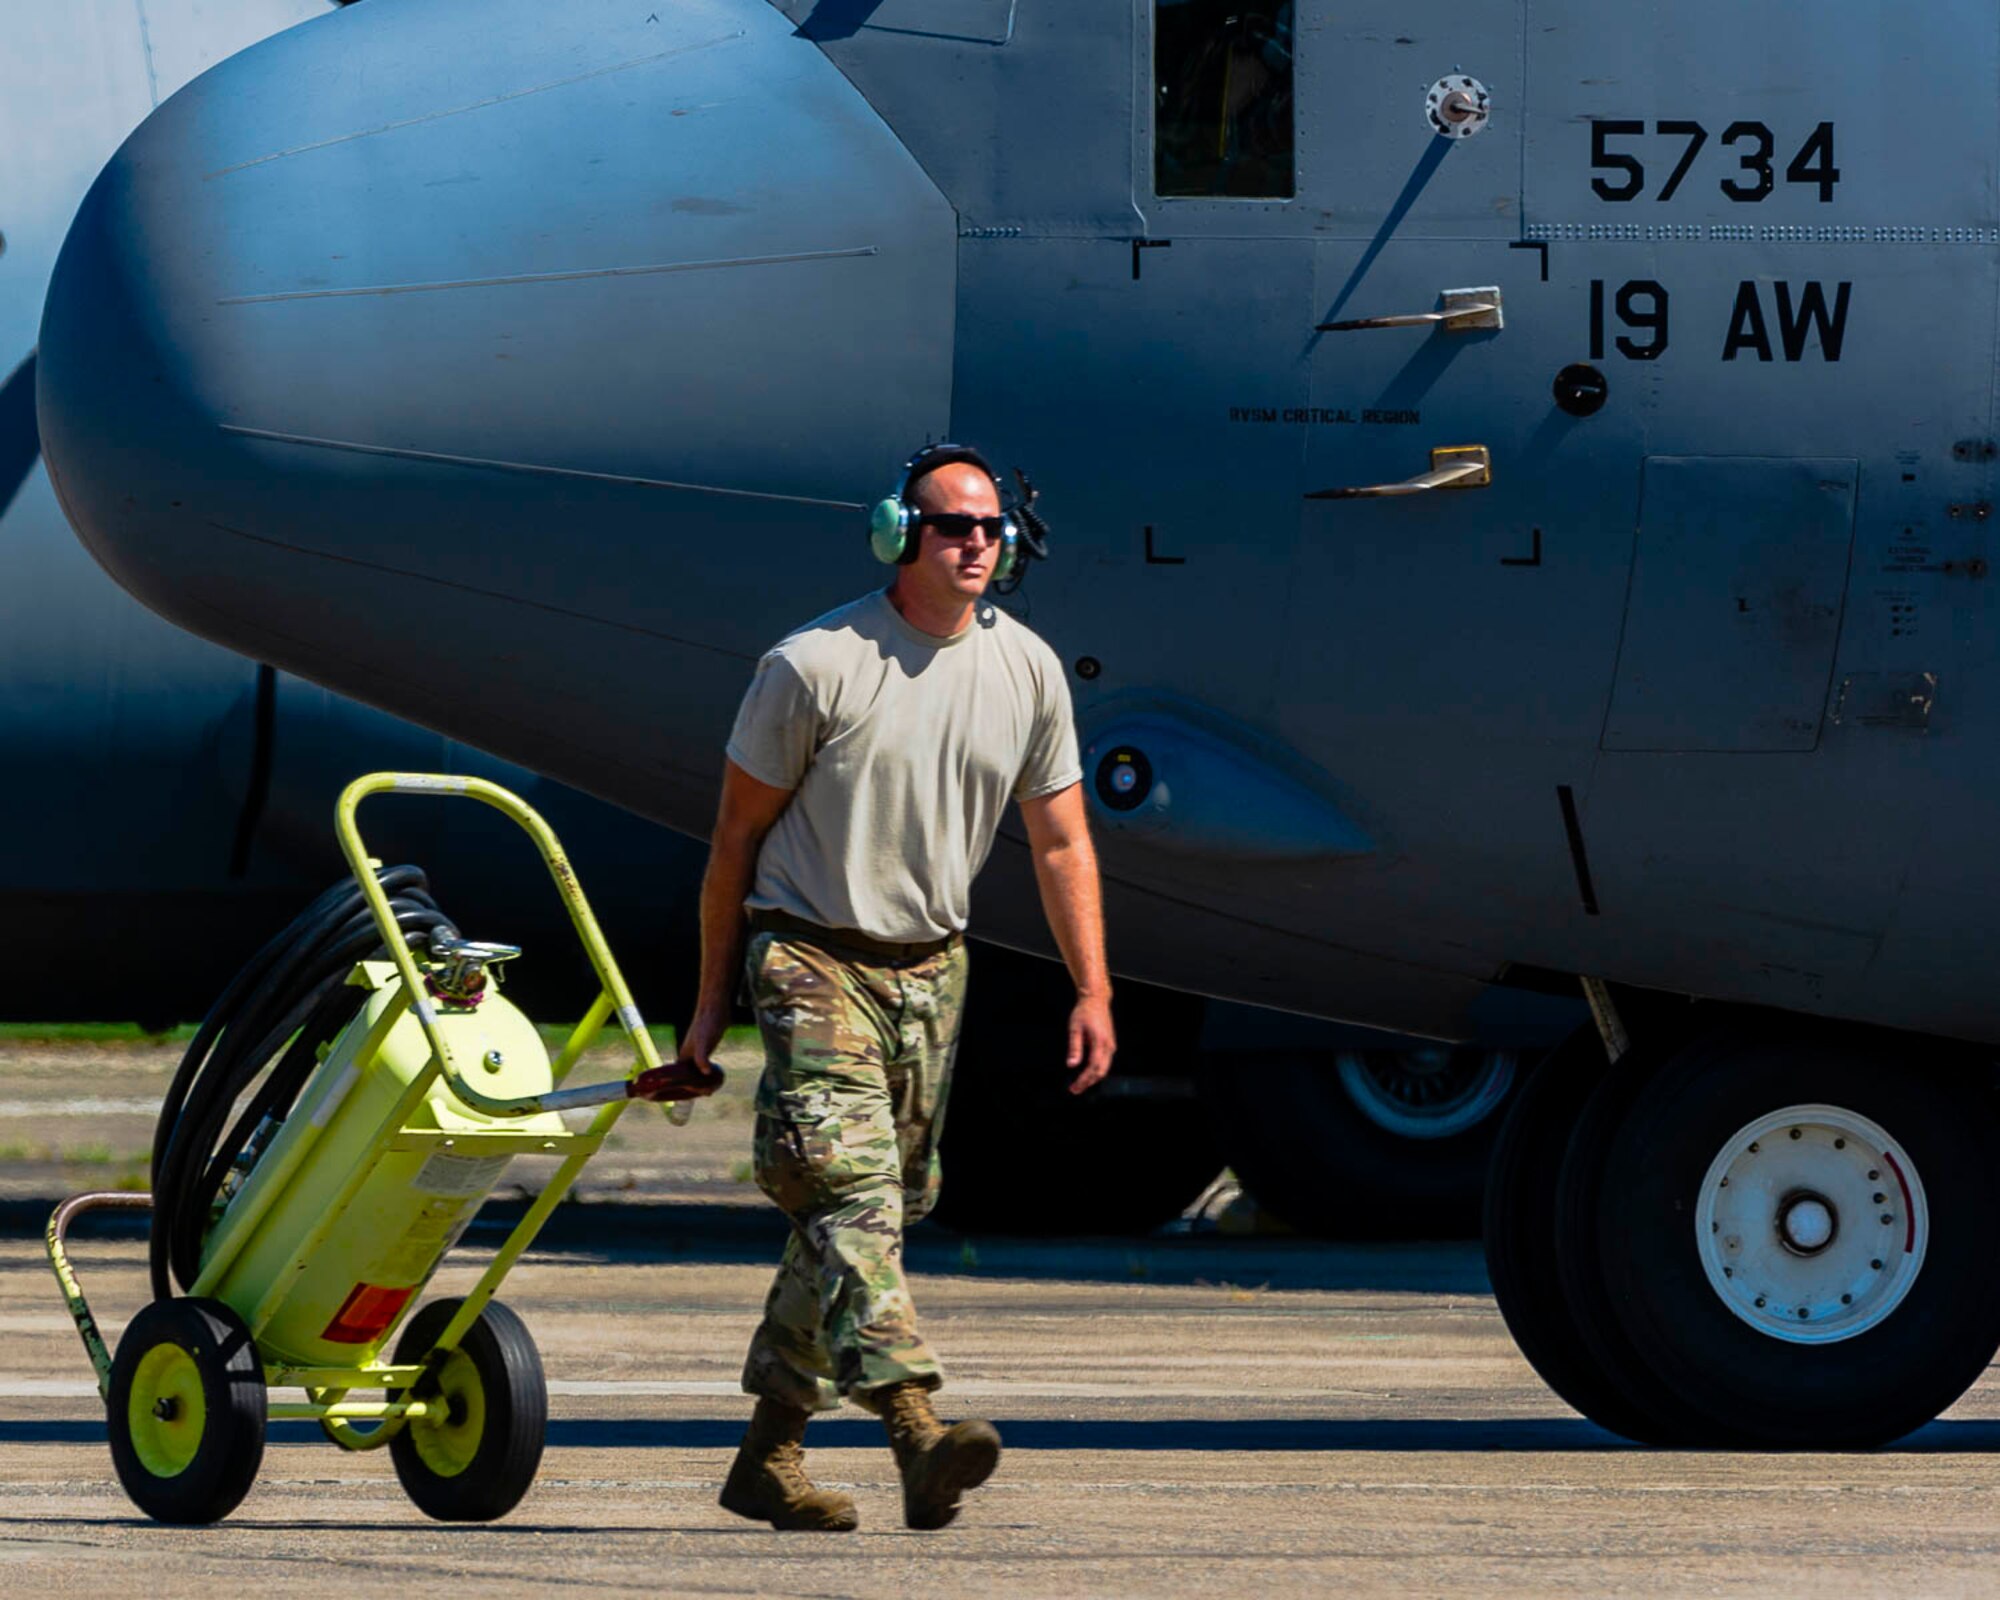 Team Little Rock personnel prepare a C-130J Hercules for takeoff on August 15, 2019, at Little Rock Air Force Base, Ark. There are a multitude of maintenance career fields collaborating to certify the aircraft are safe and ready to meet training and operation requirements. The 913th Airlift Group was first assembled in July 2014 as a classic association with the 19th Airlift Wing. Since then, we have leveraged on our Total Force partners to hone our combat airlift tactics. (U.S. Air Force Reserve photo by Maj. Ashley Walker)